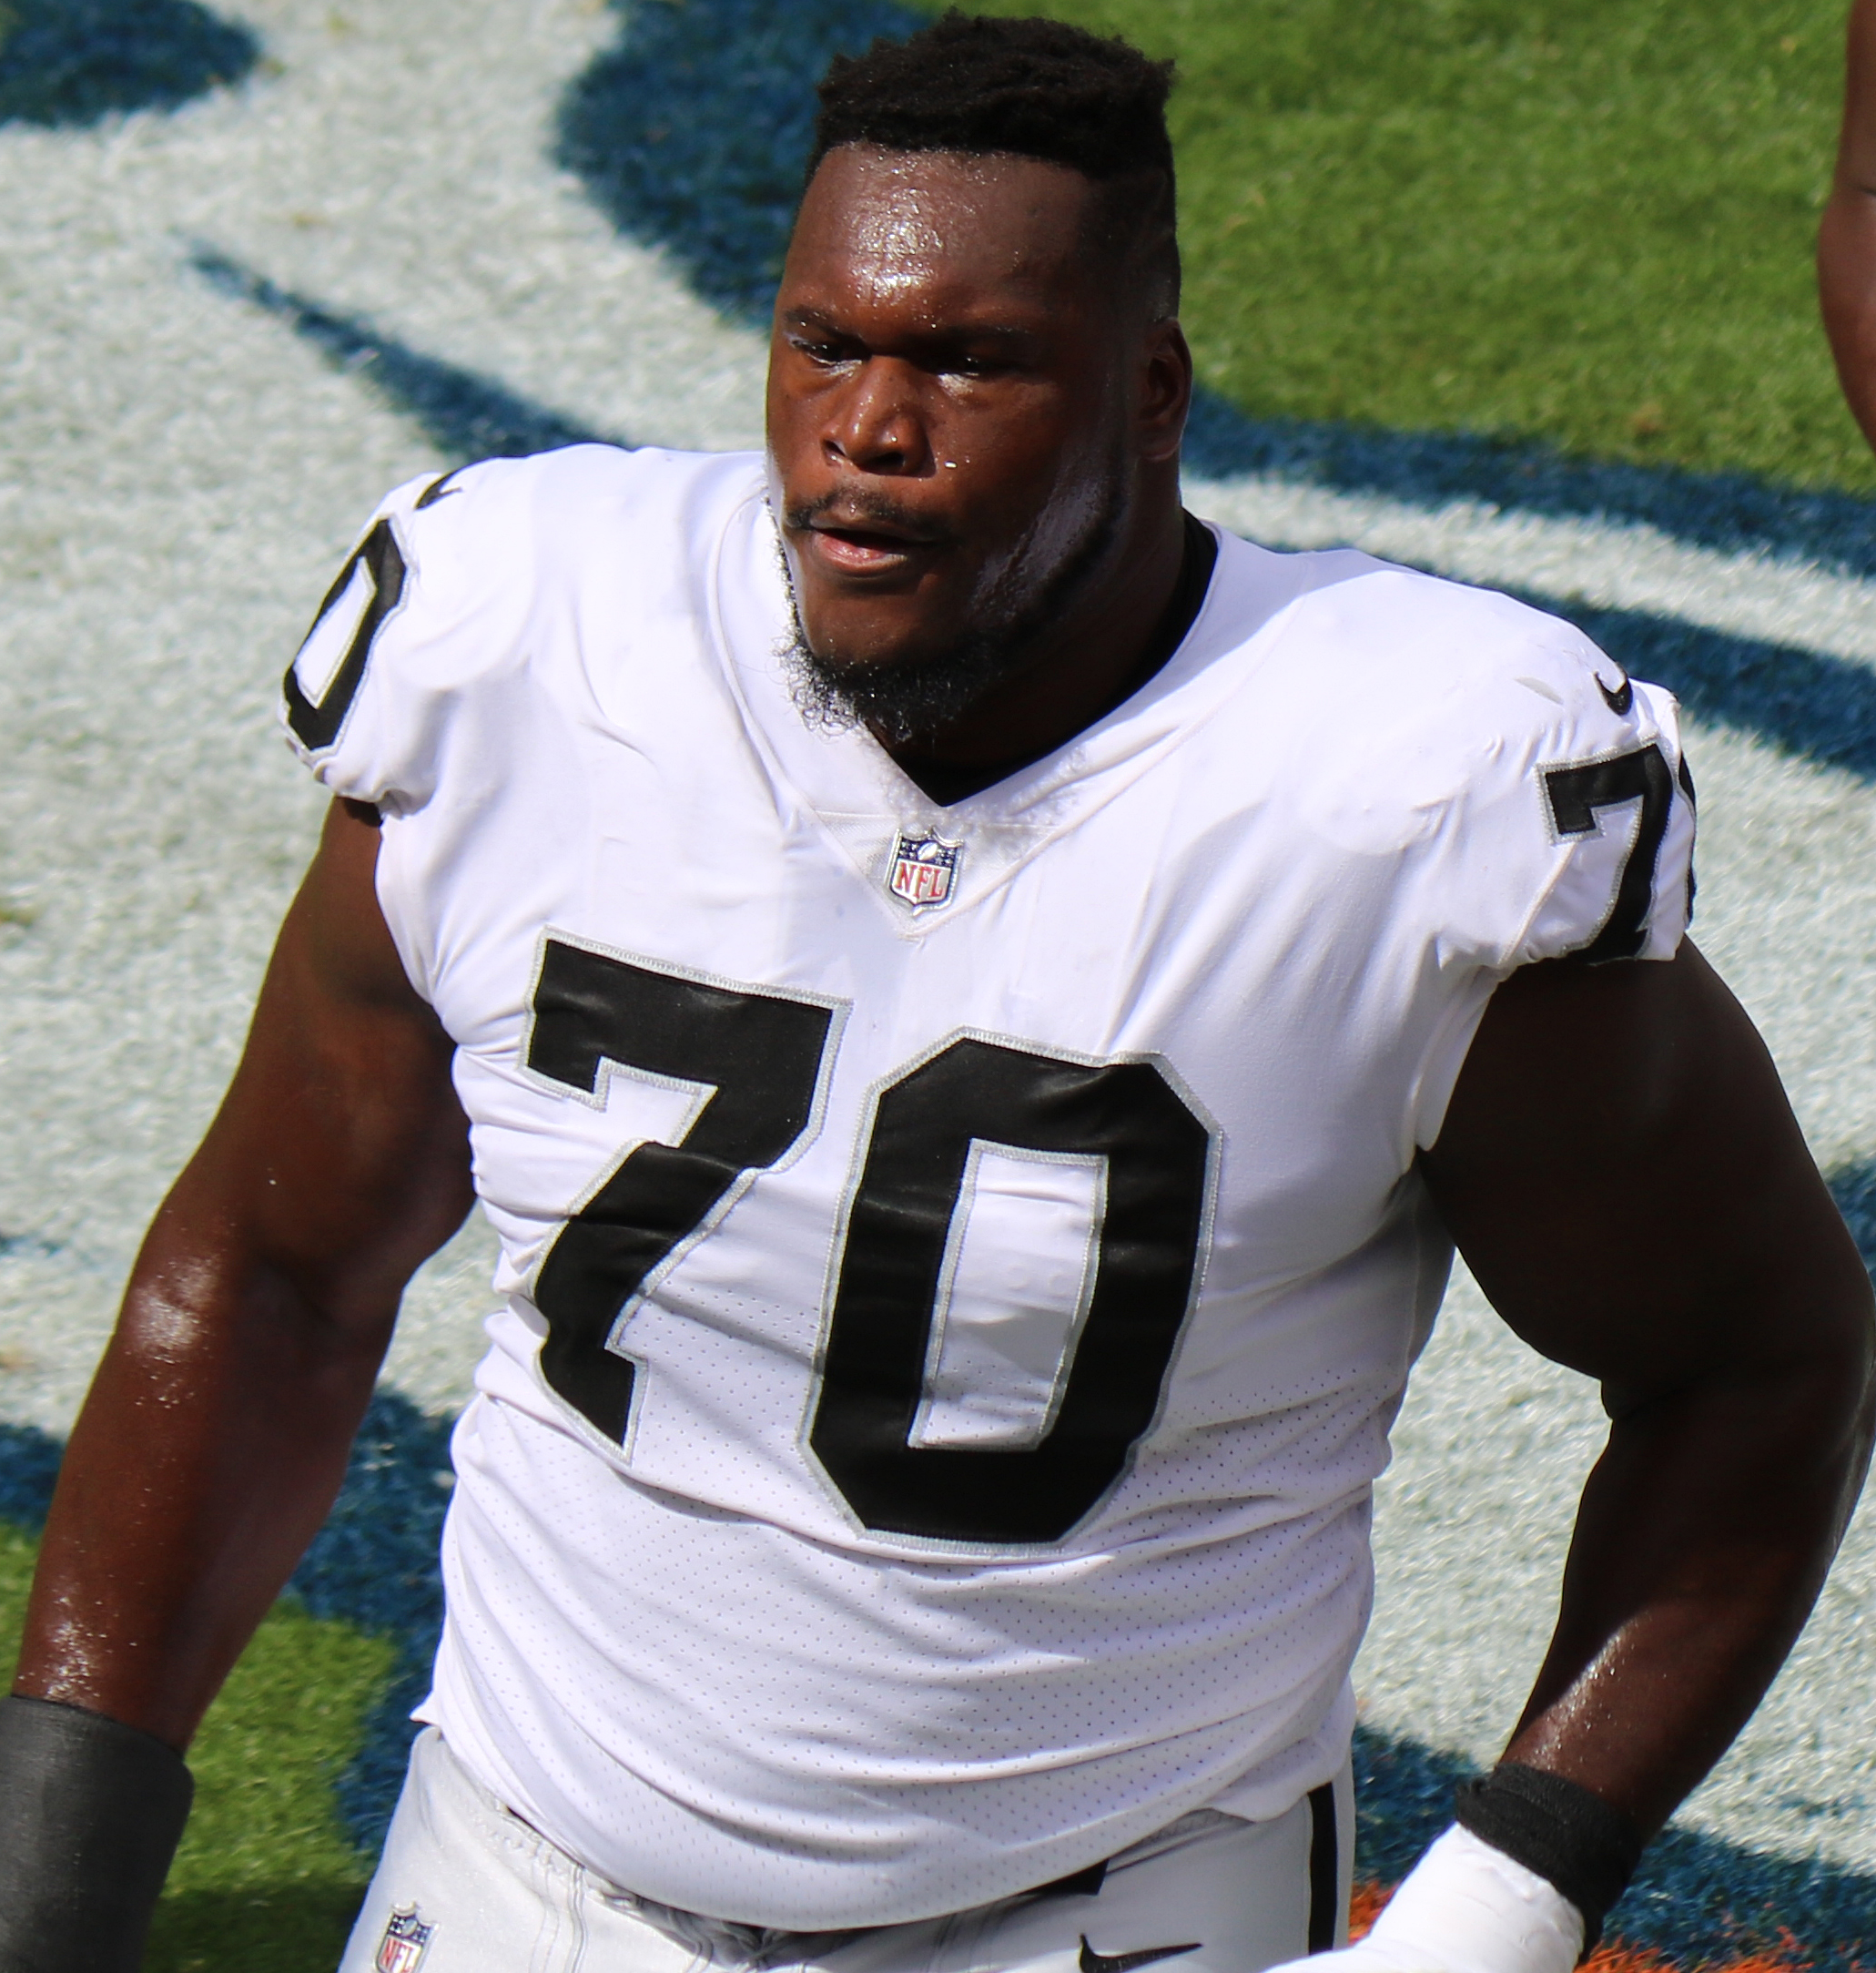 Raiders to trade Osemele to Jets